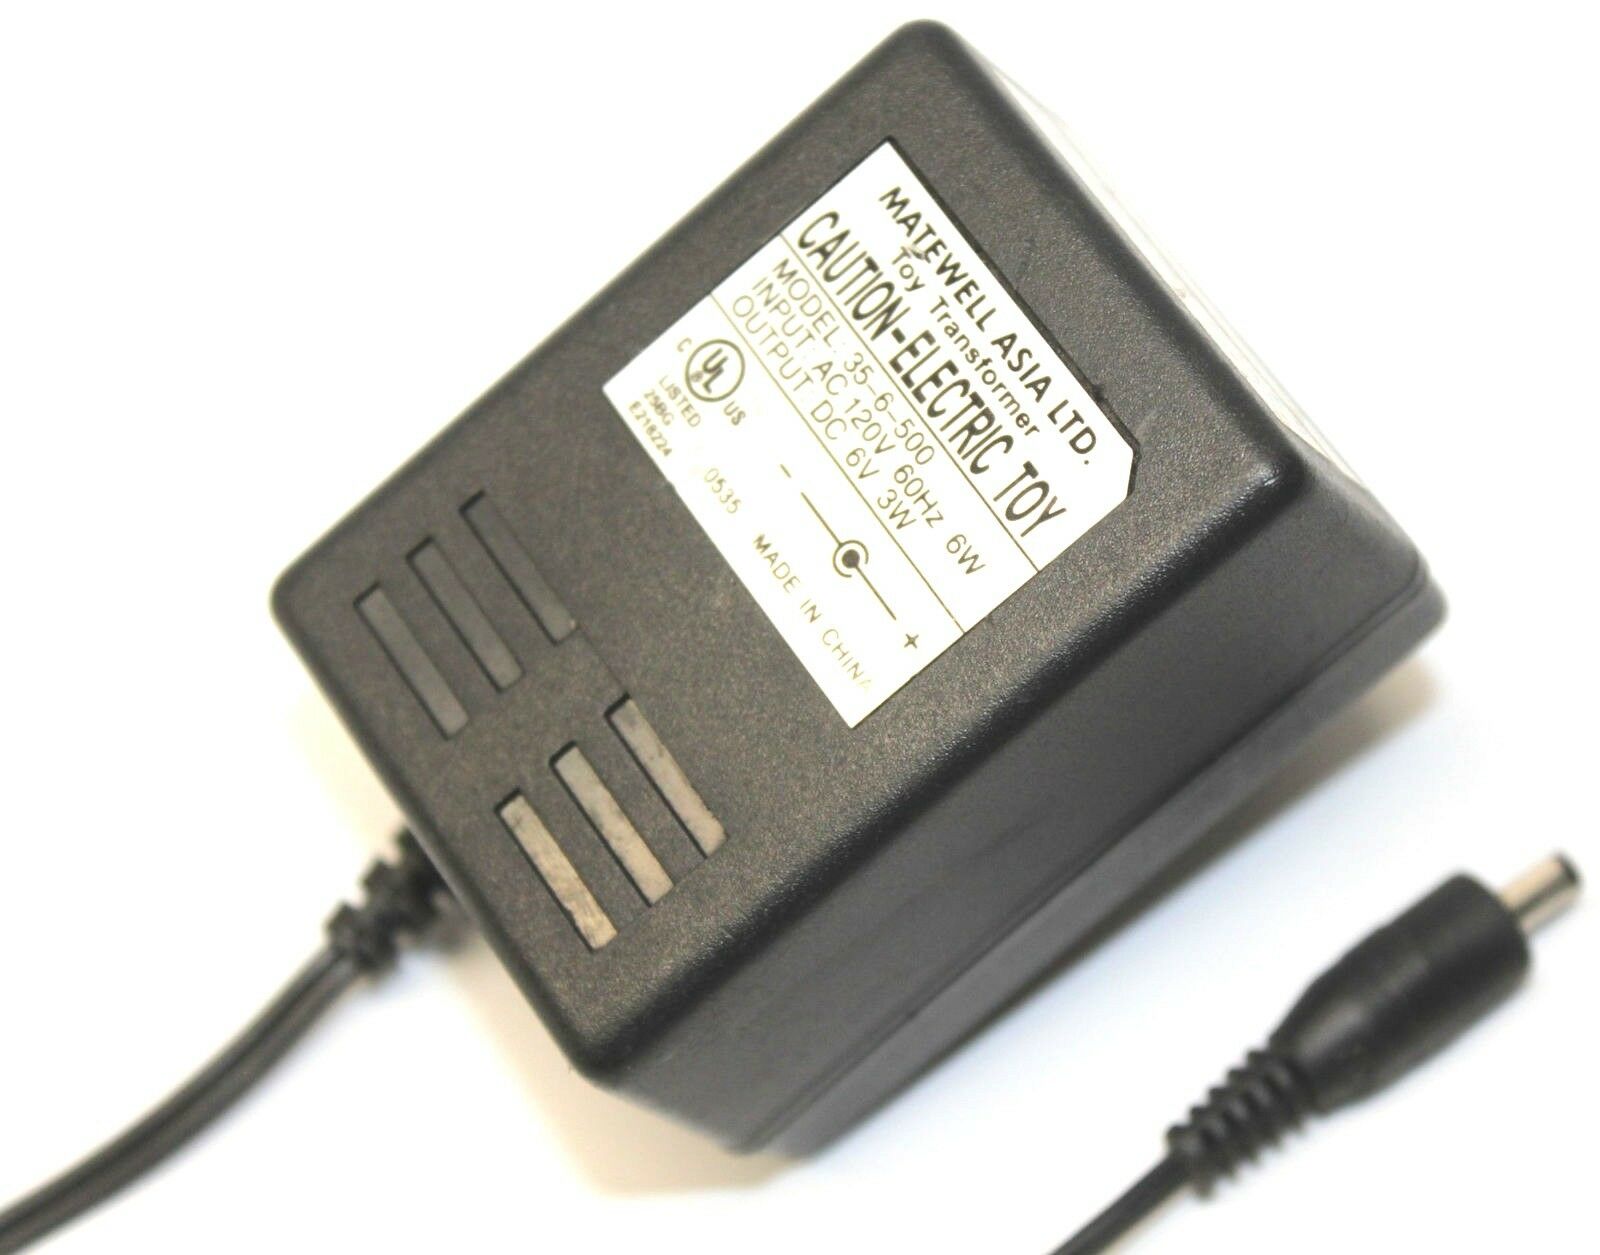 Matewell 35-6-500 Toy Transformer AC Adapter 6 Volts 3 Watts Power Supply Cable MPN: Does Not Apply Model: 35-6-500 - Click Image to Close